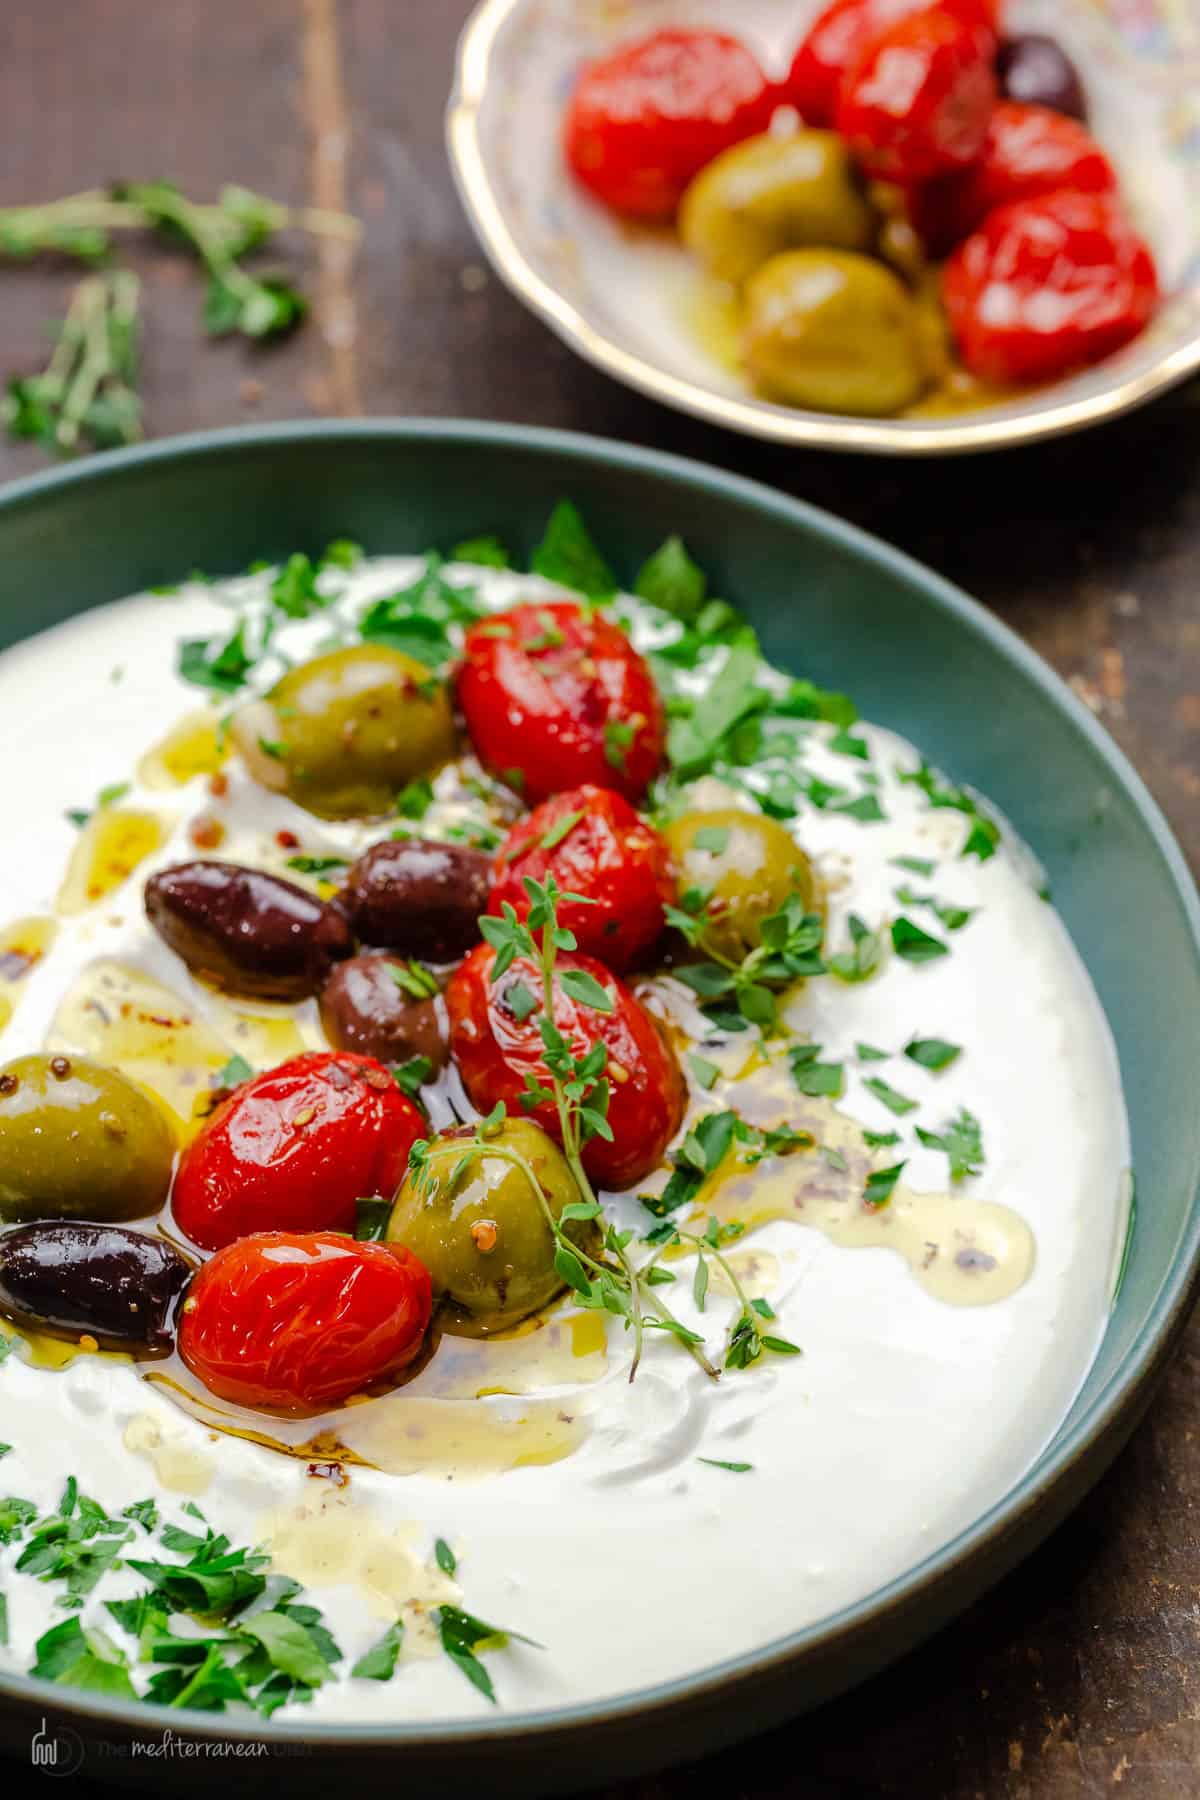 whipped labneh dip in a bowl topped with warmed olives and tomatoes in olive oil, garnished with parsley. another bowl of warmed olives and tomatoes in the background